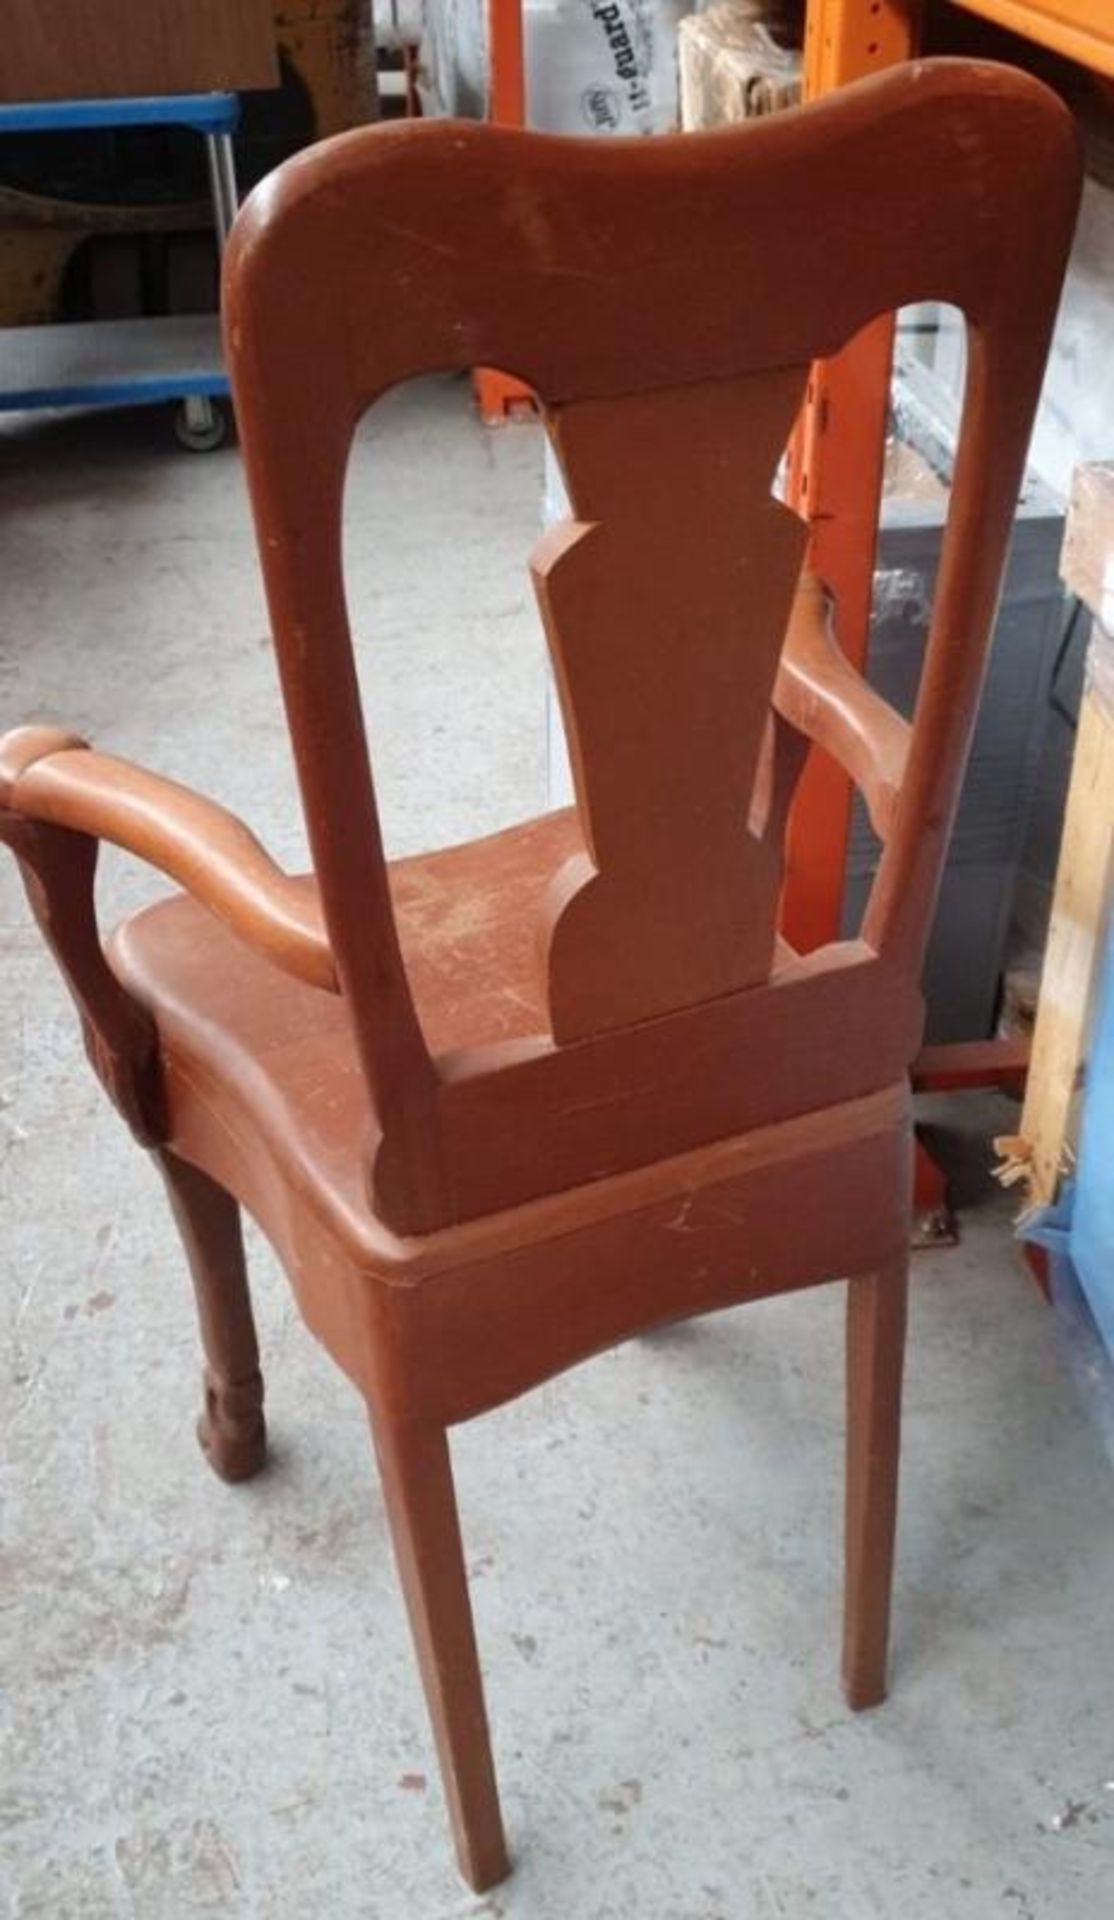 1 x Vintage Bespoke Carved Solid Wood Chair Featuring A Drawer In The Seat *Low Start, No Reserve* - Image 2 of 4